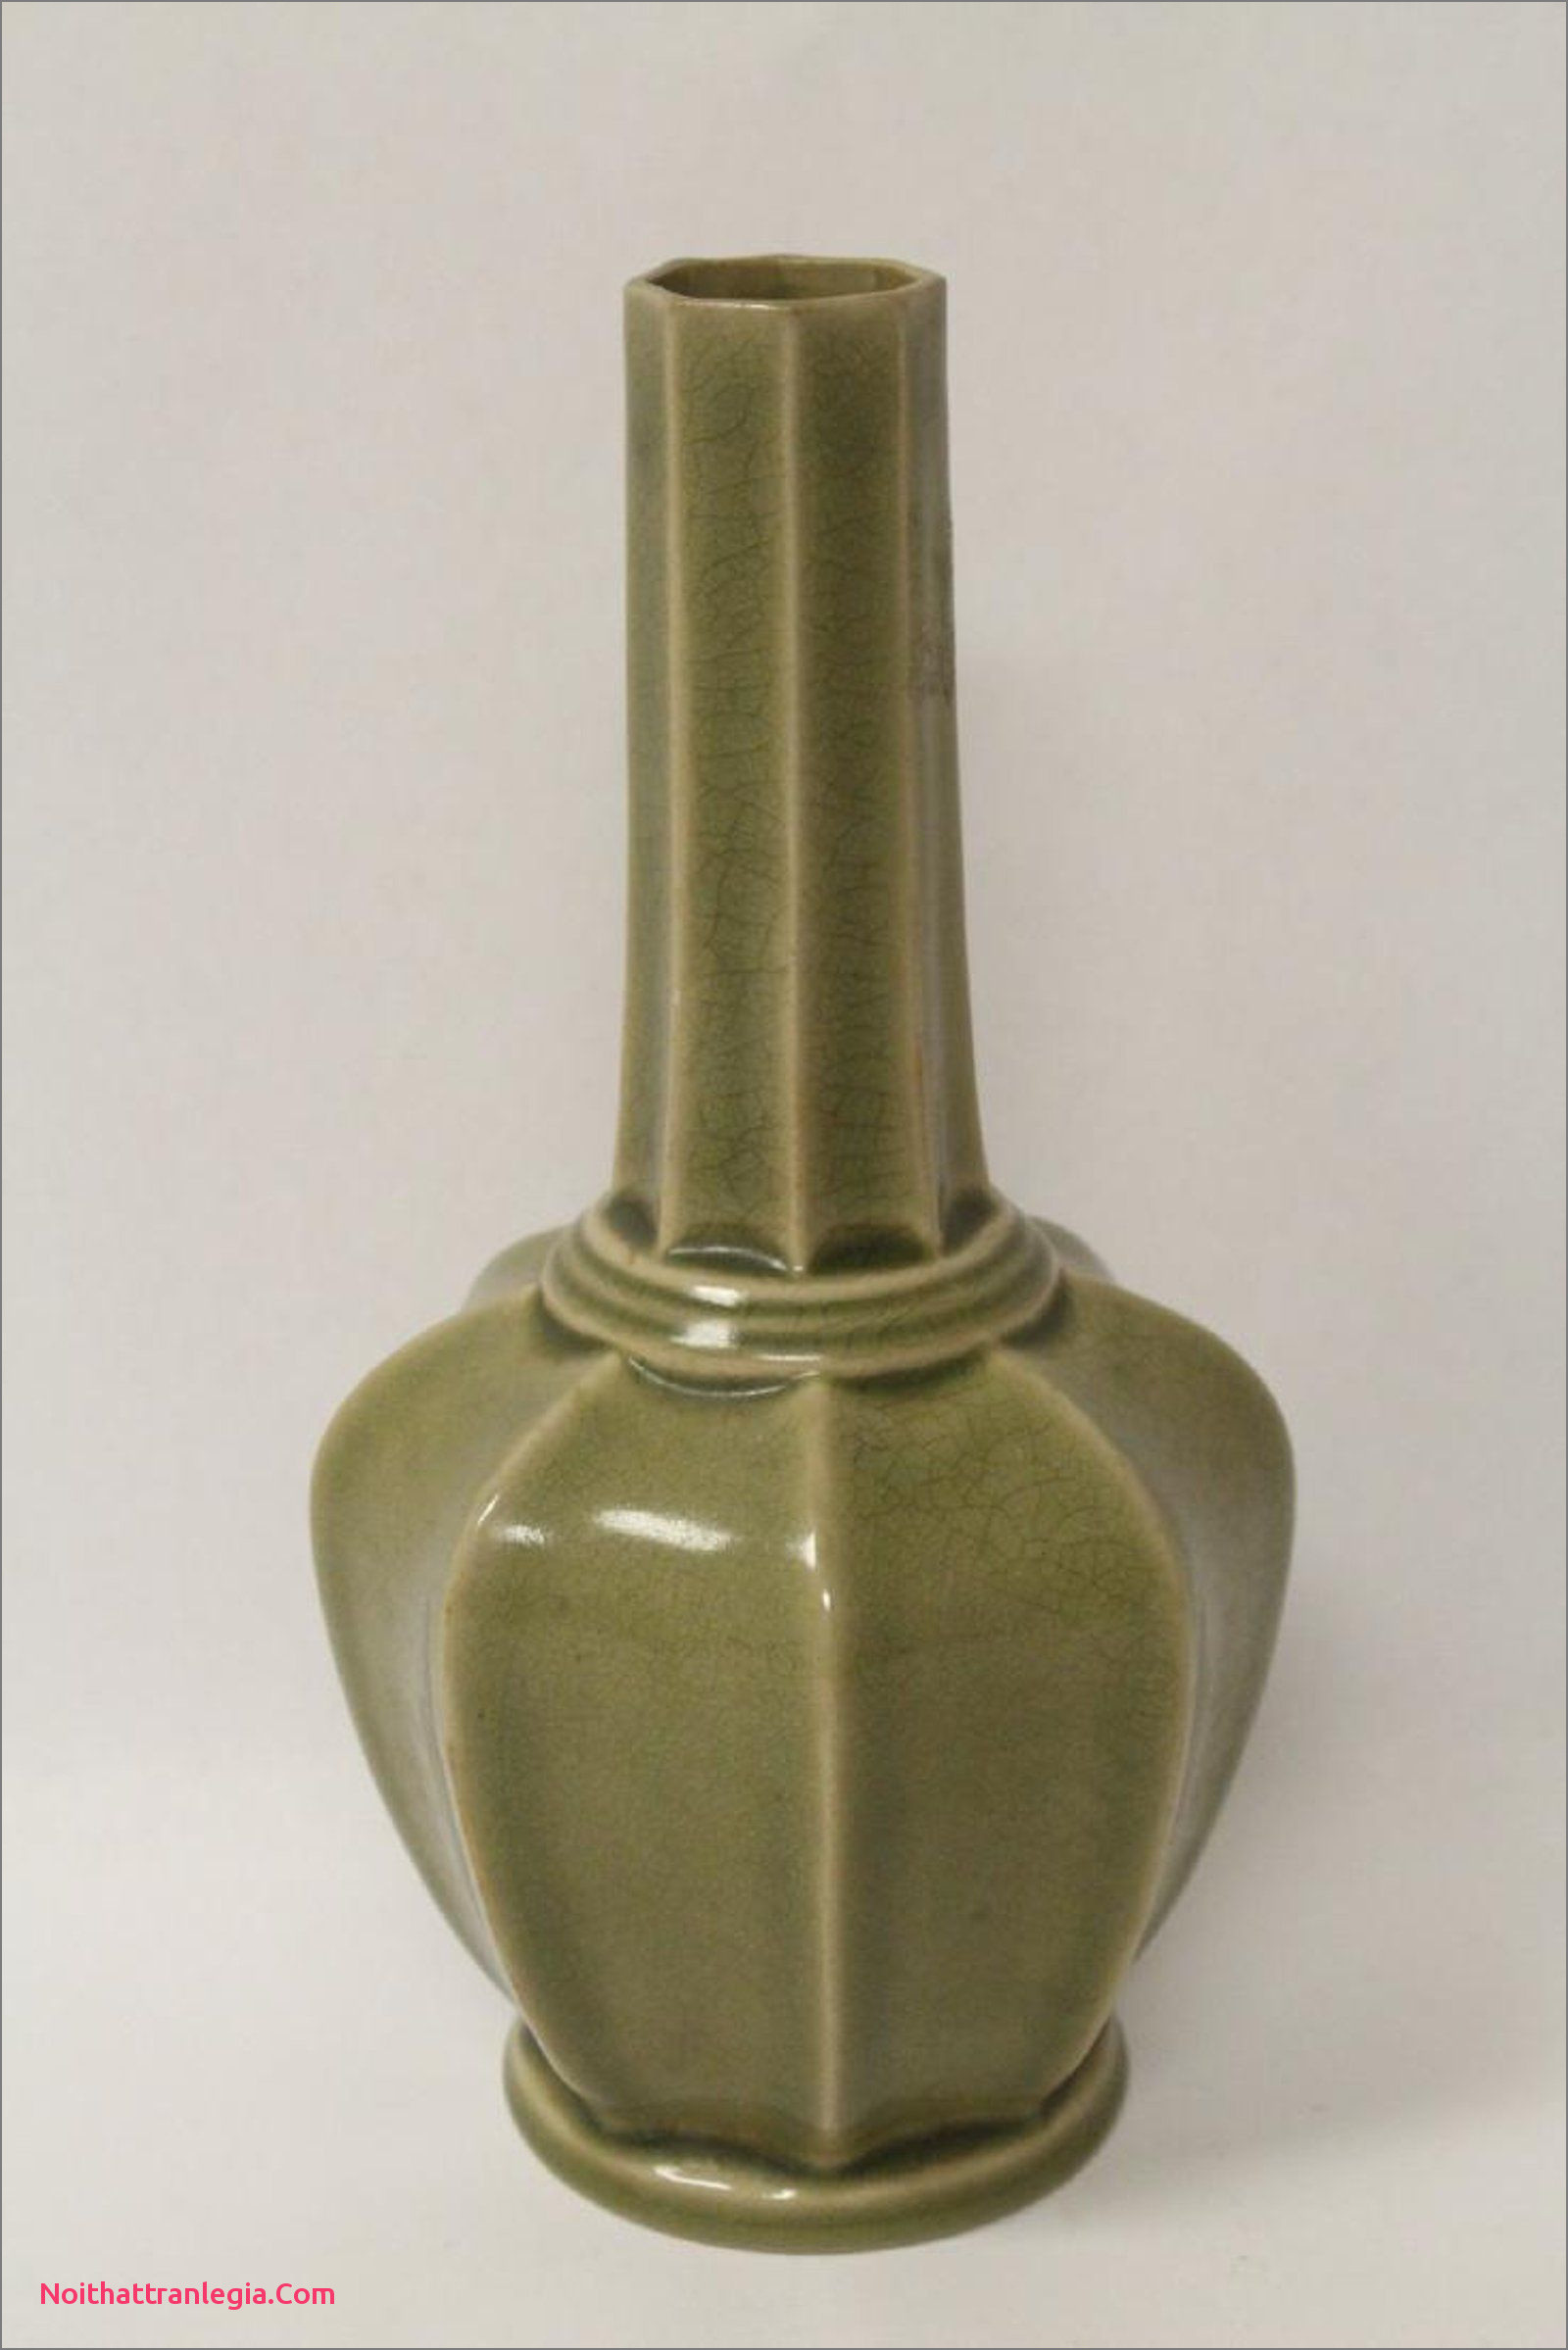 20 Nice asian Vases for Sale 2024 free download asian vases for sale of 20 chinese antique vase noithattranlegia vases design with chinese song style celadon porcelain vase